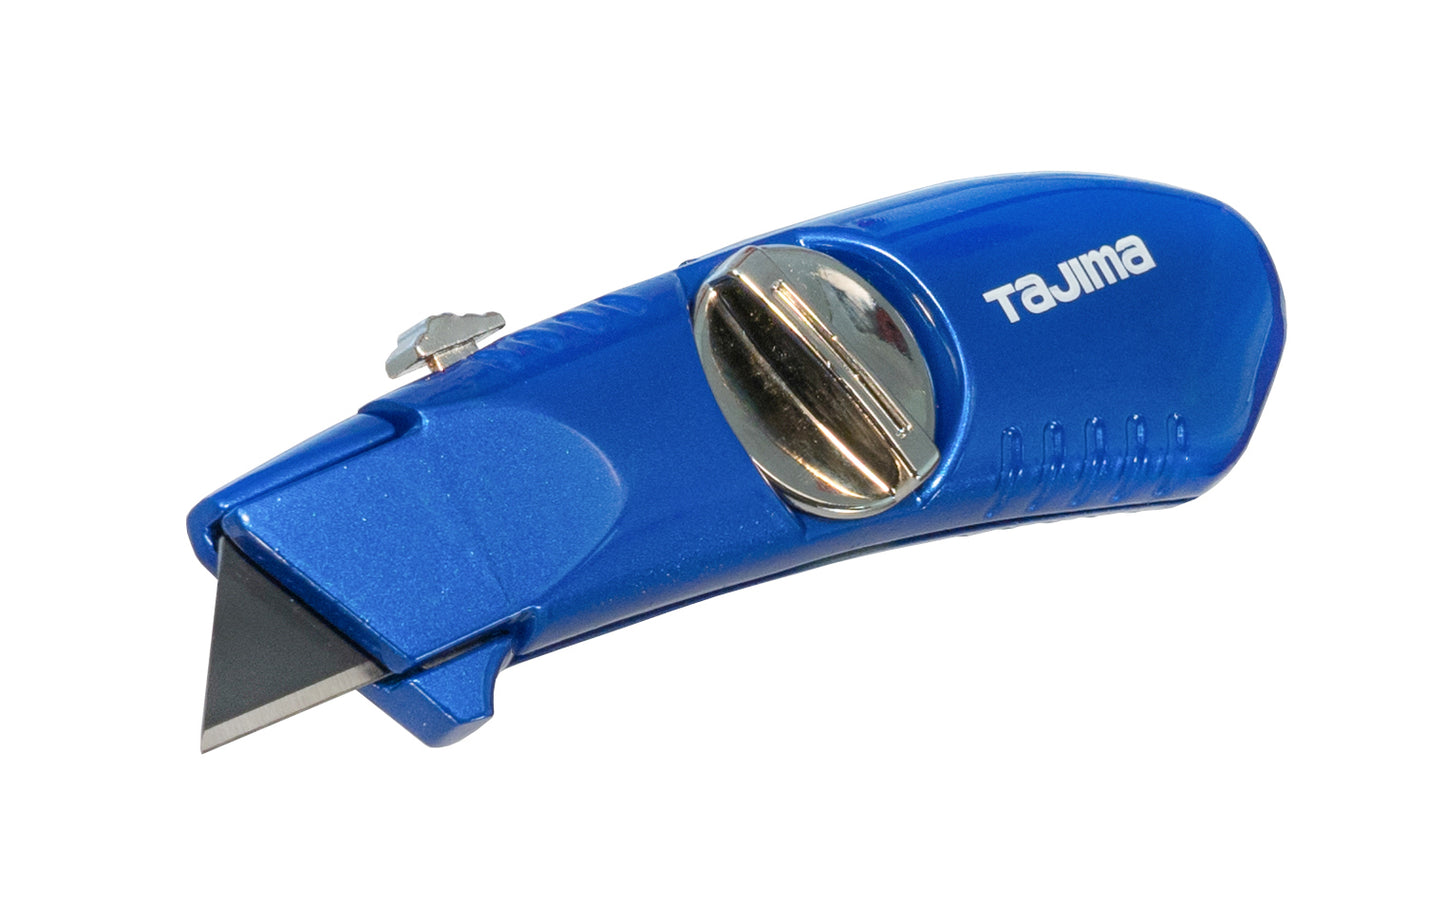 Tajima Model No. VR-102B ~ Blade storage integrated into handle ~ Includes 3 utility blades ~ Rugged one-piece retractable utility knife - Opens easily with a large thumb-screw - Opens easily with a large thumb-screw featuring a magnetic blade retainer & spare blades clip - V REX Tajima Utility Knife - 049296019679